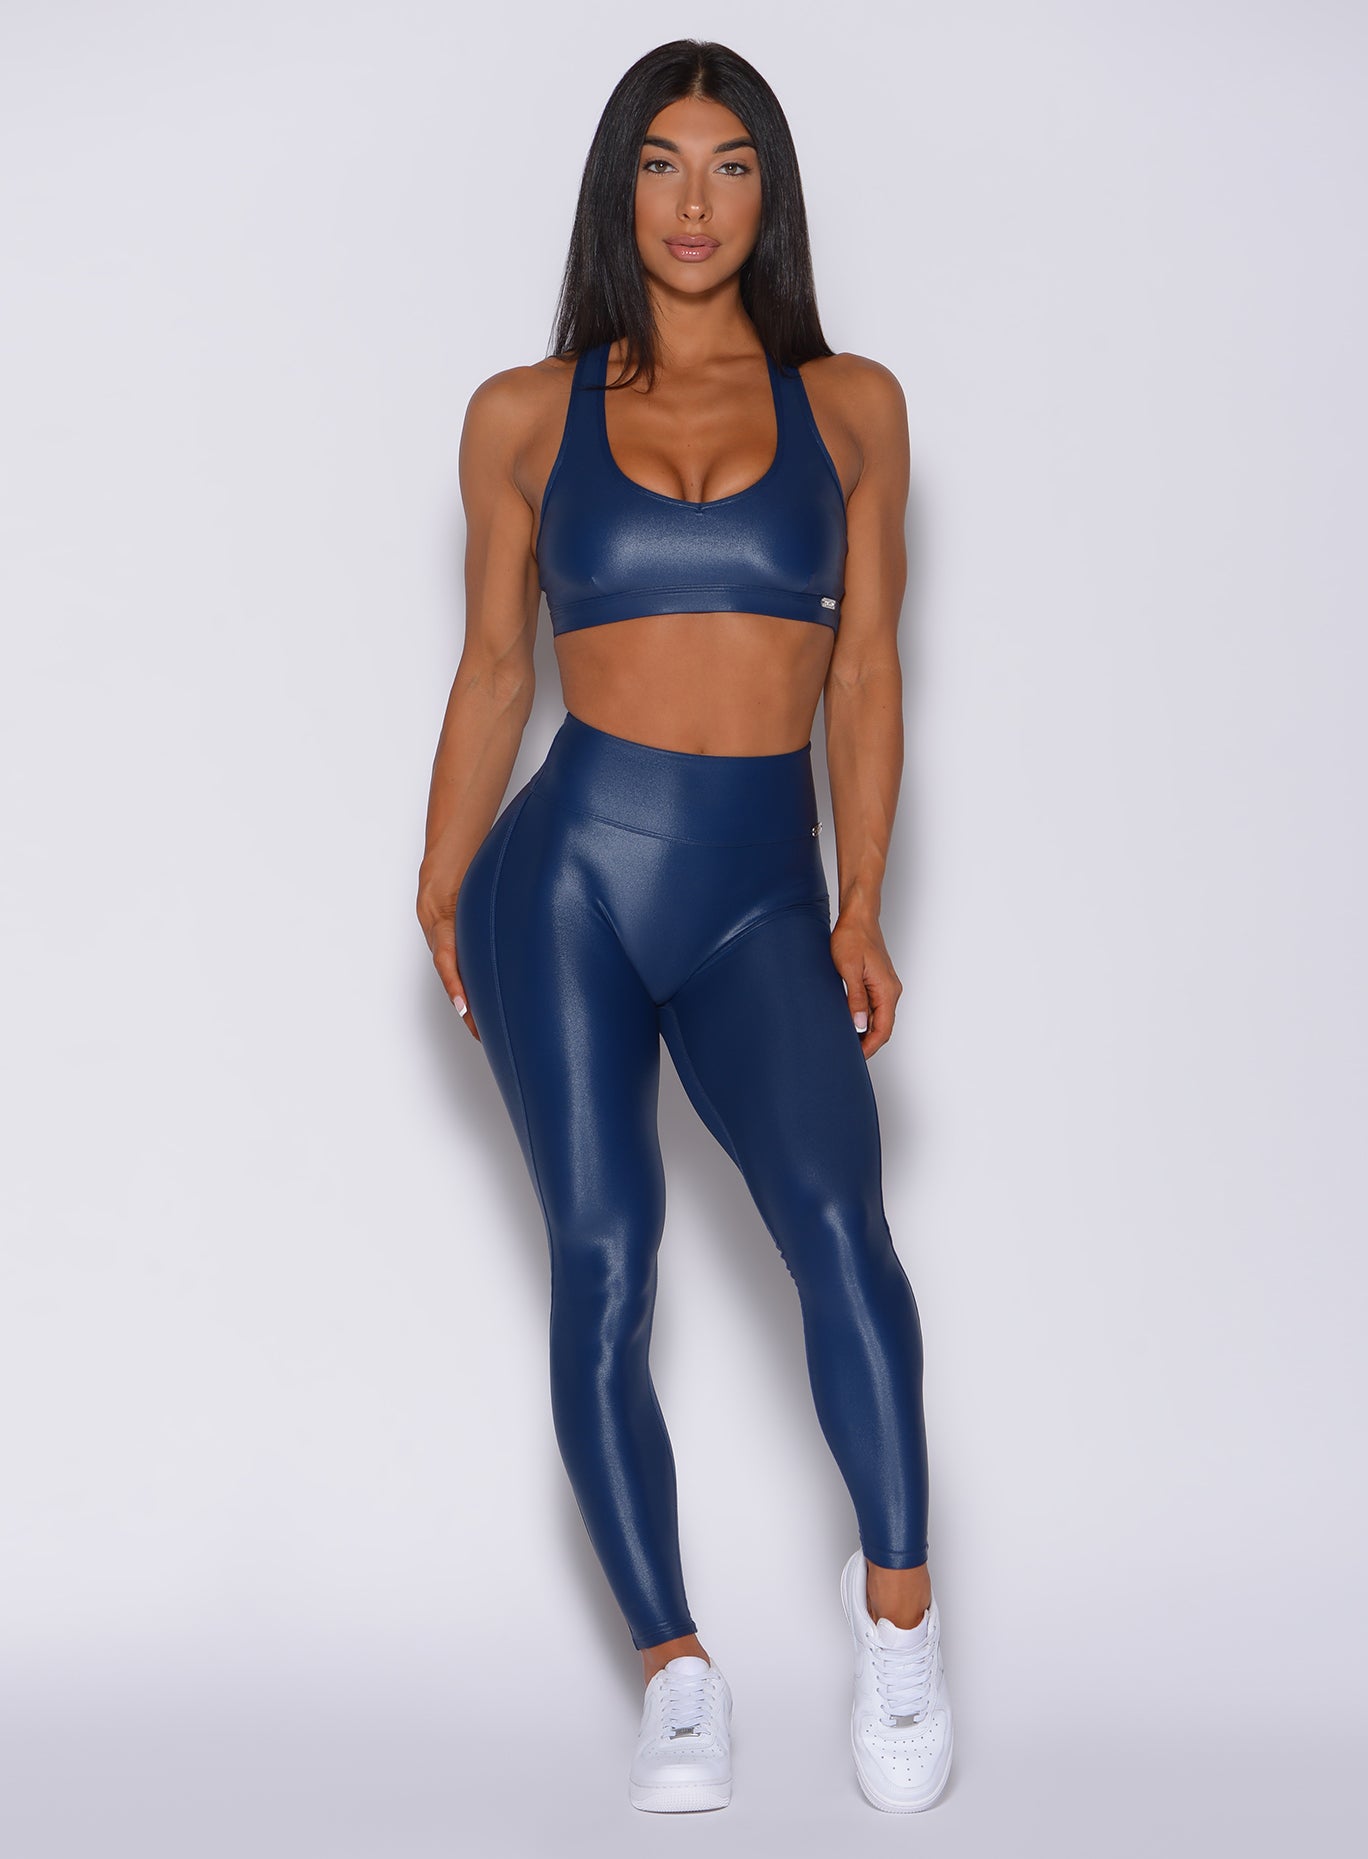 Those Gloss leggings though. Restocks in 2 weeks. Are you on our email list  to be notified? @alexisquiterio @bombshellsportswear  #bombshellsportswear